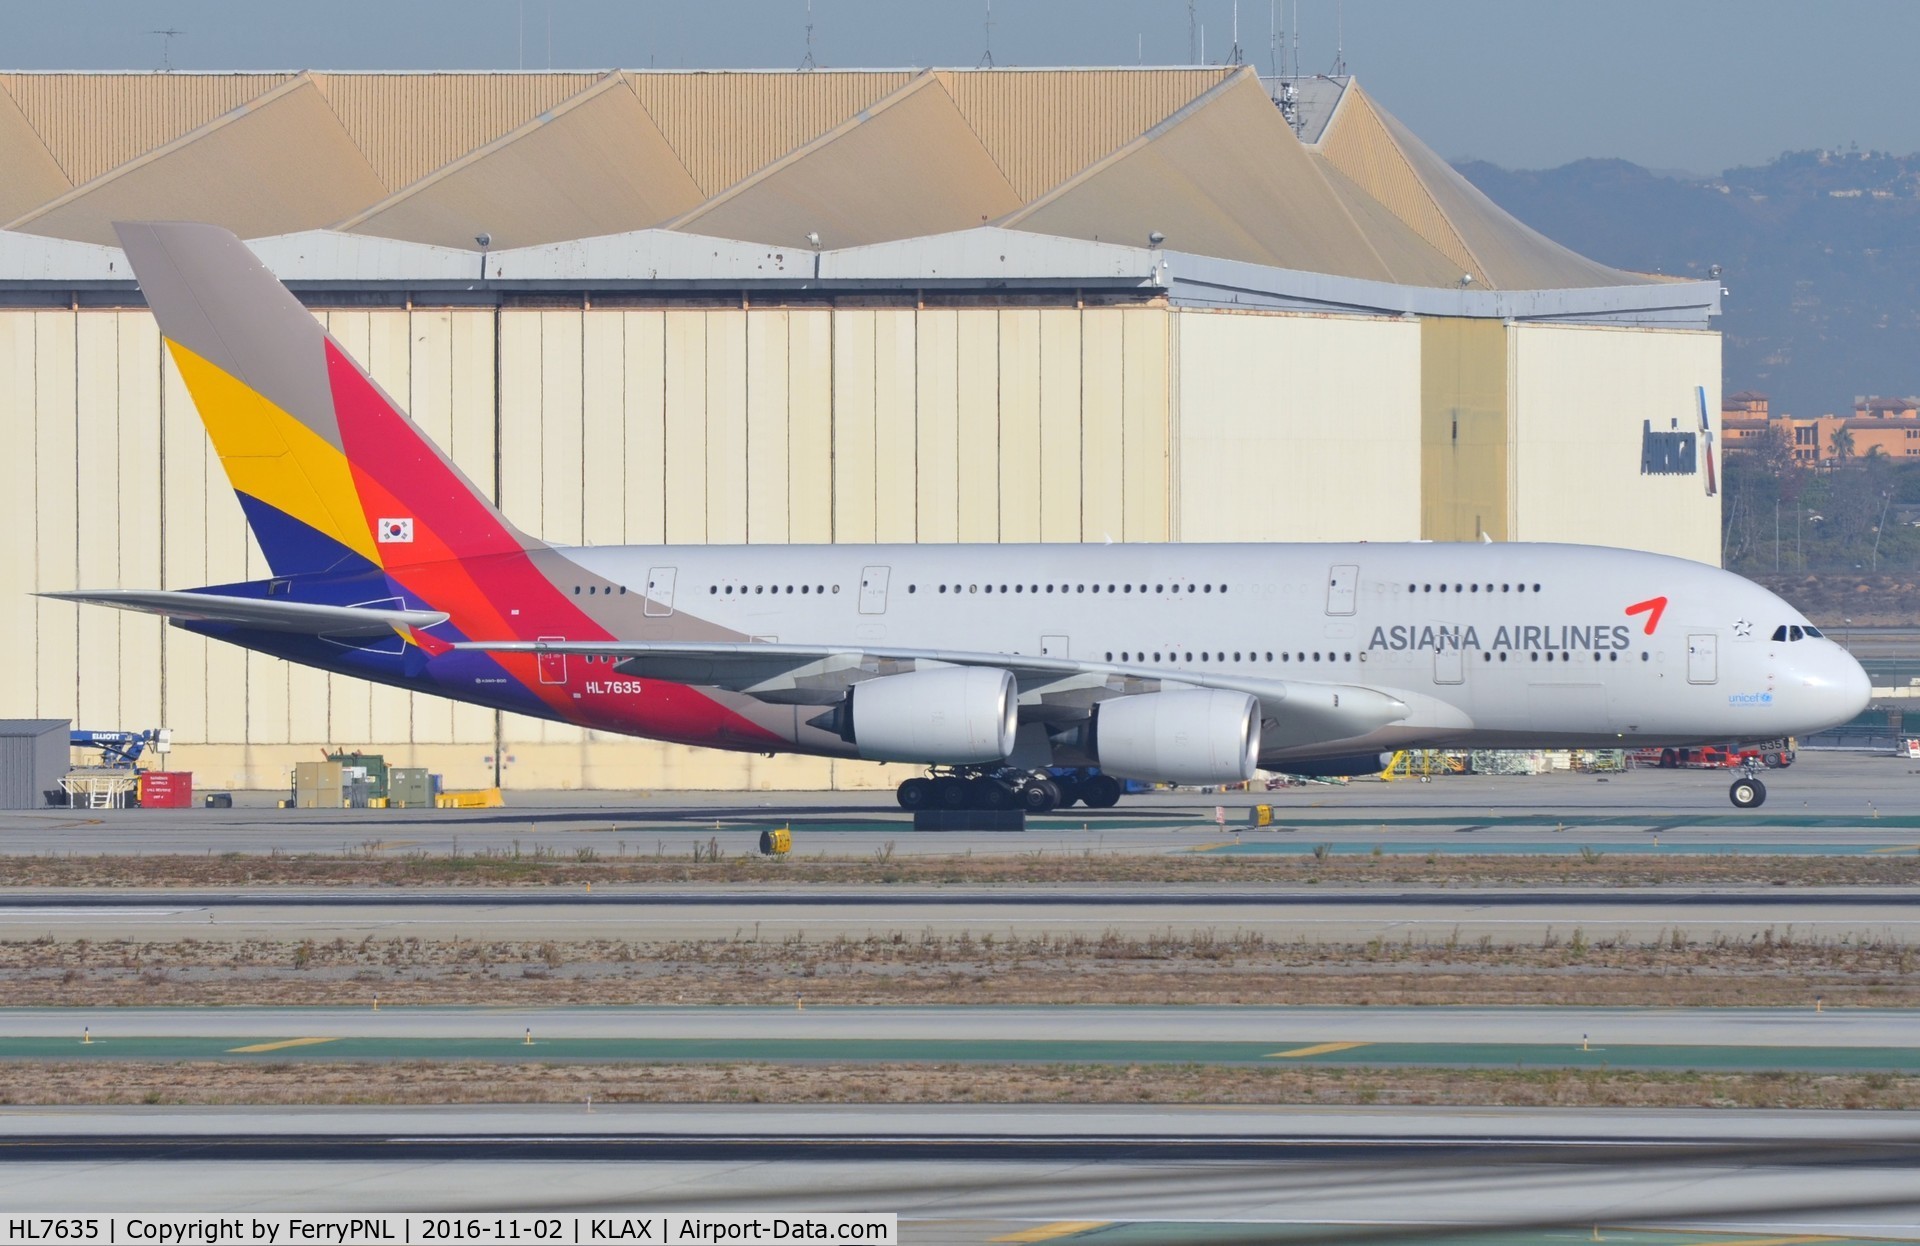 HL7635, 2015 Airbus A380-841 C/N 183, Asiana A388 arrived from Seoul.